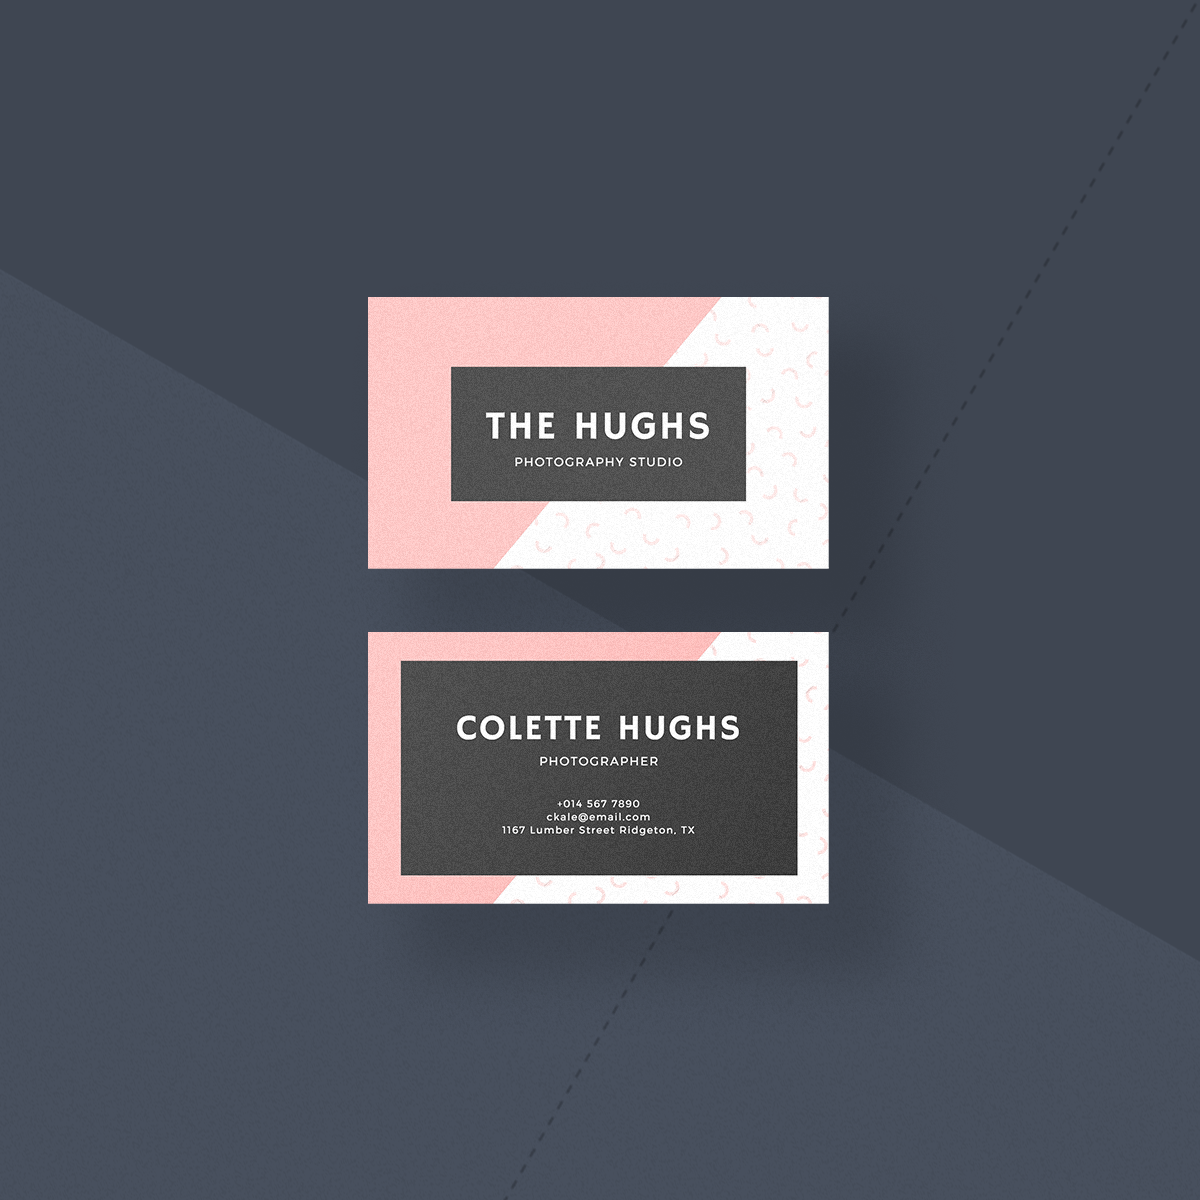 Business Card Sizes - Canva's Design Wiki size guide - Canva's Design Wiki